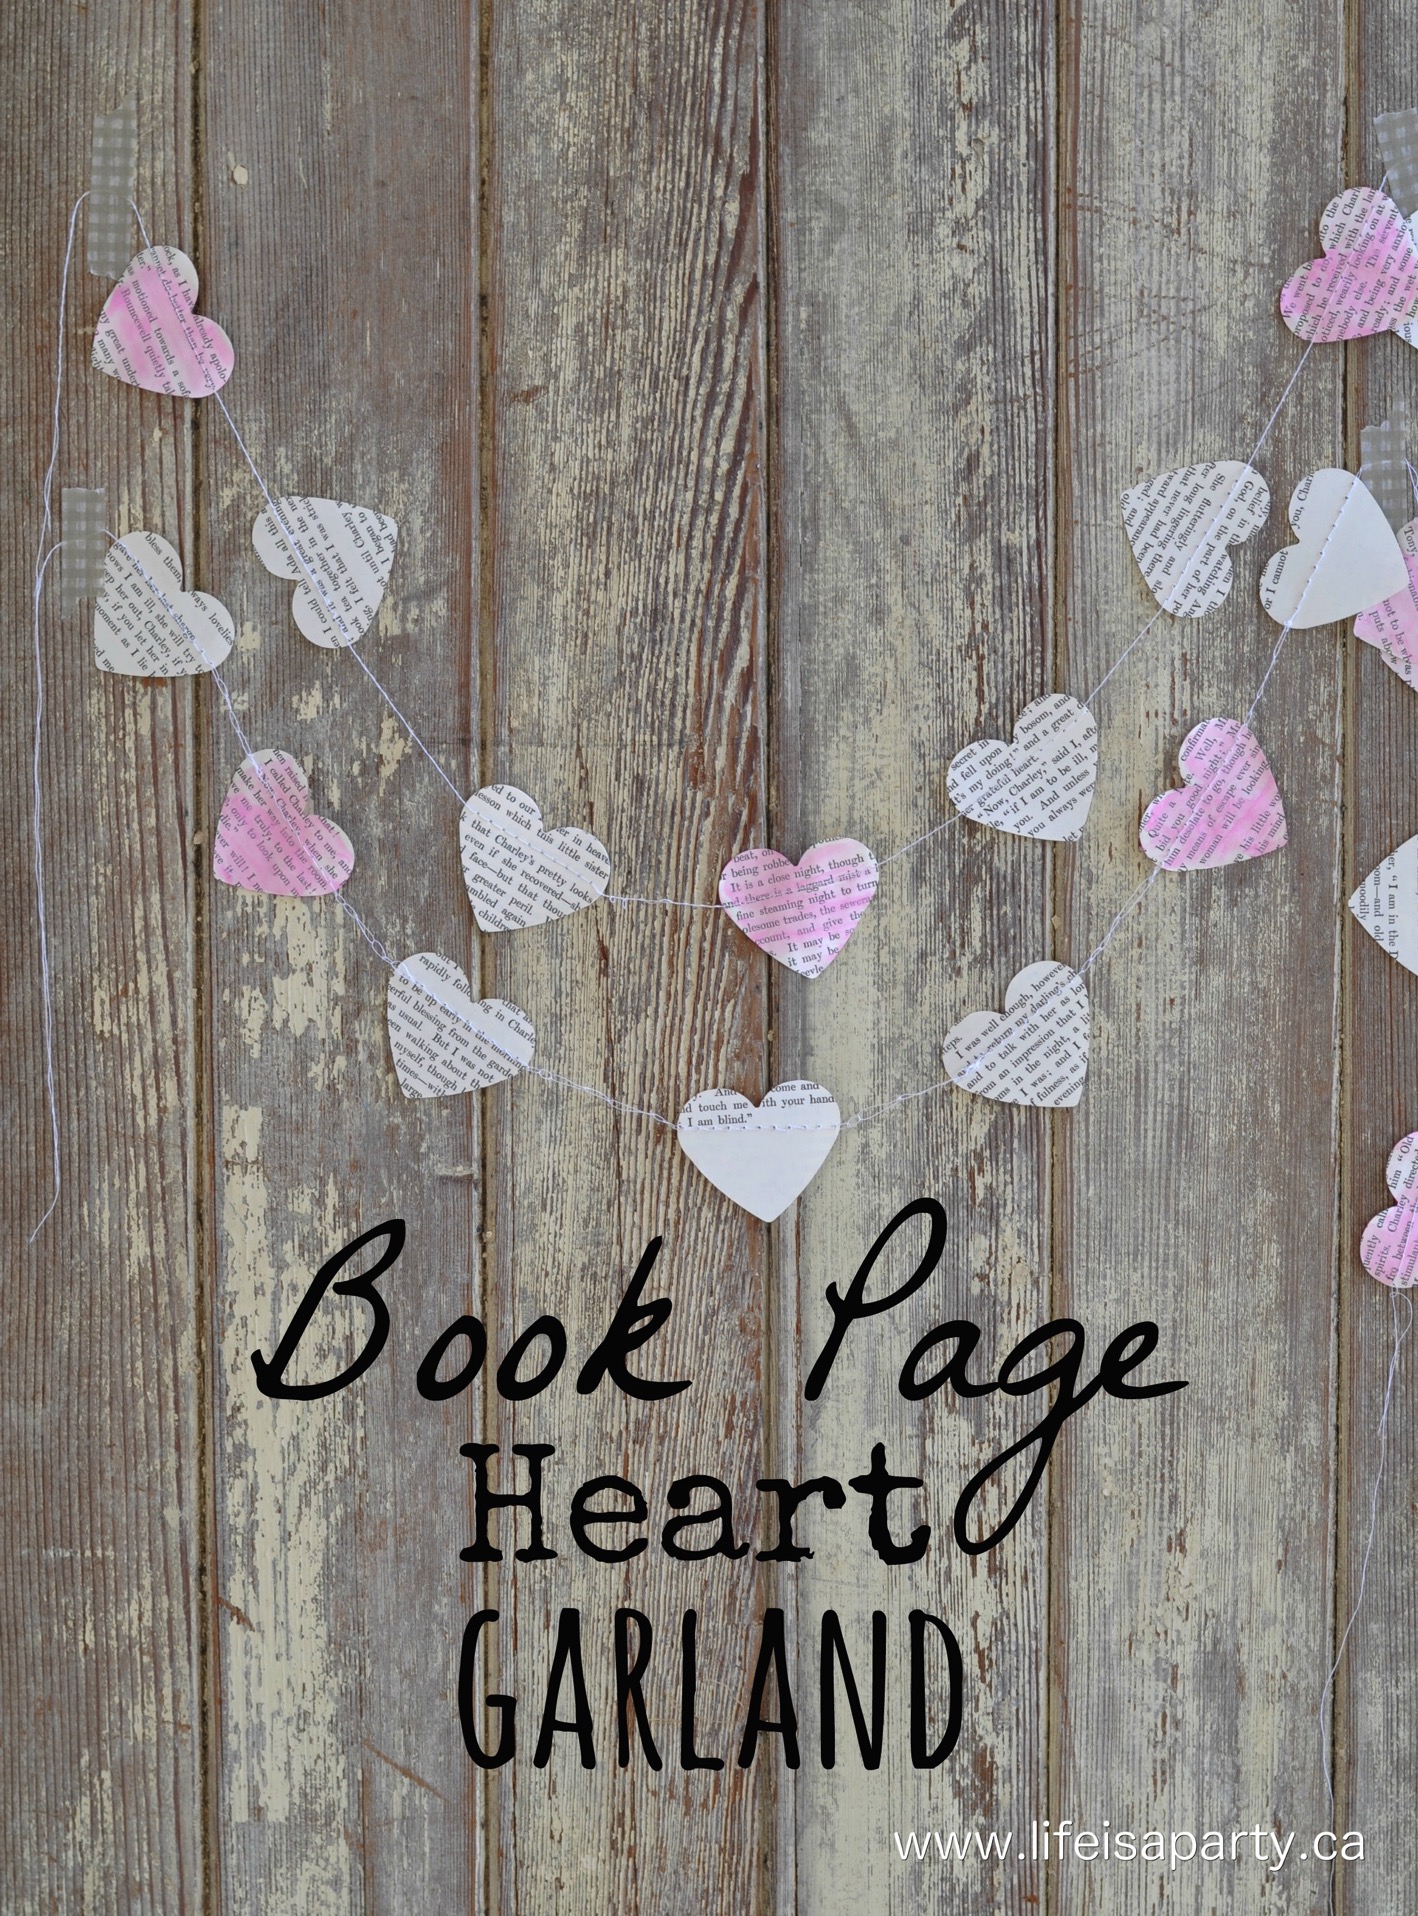 Book Page Heart Garland: How to make a DIY watercolour book page heart garland with an old book and a sewing machine, easy and inexpensive.